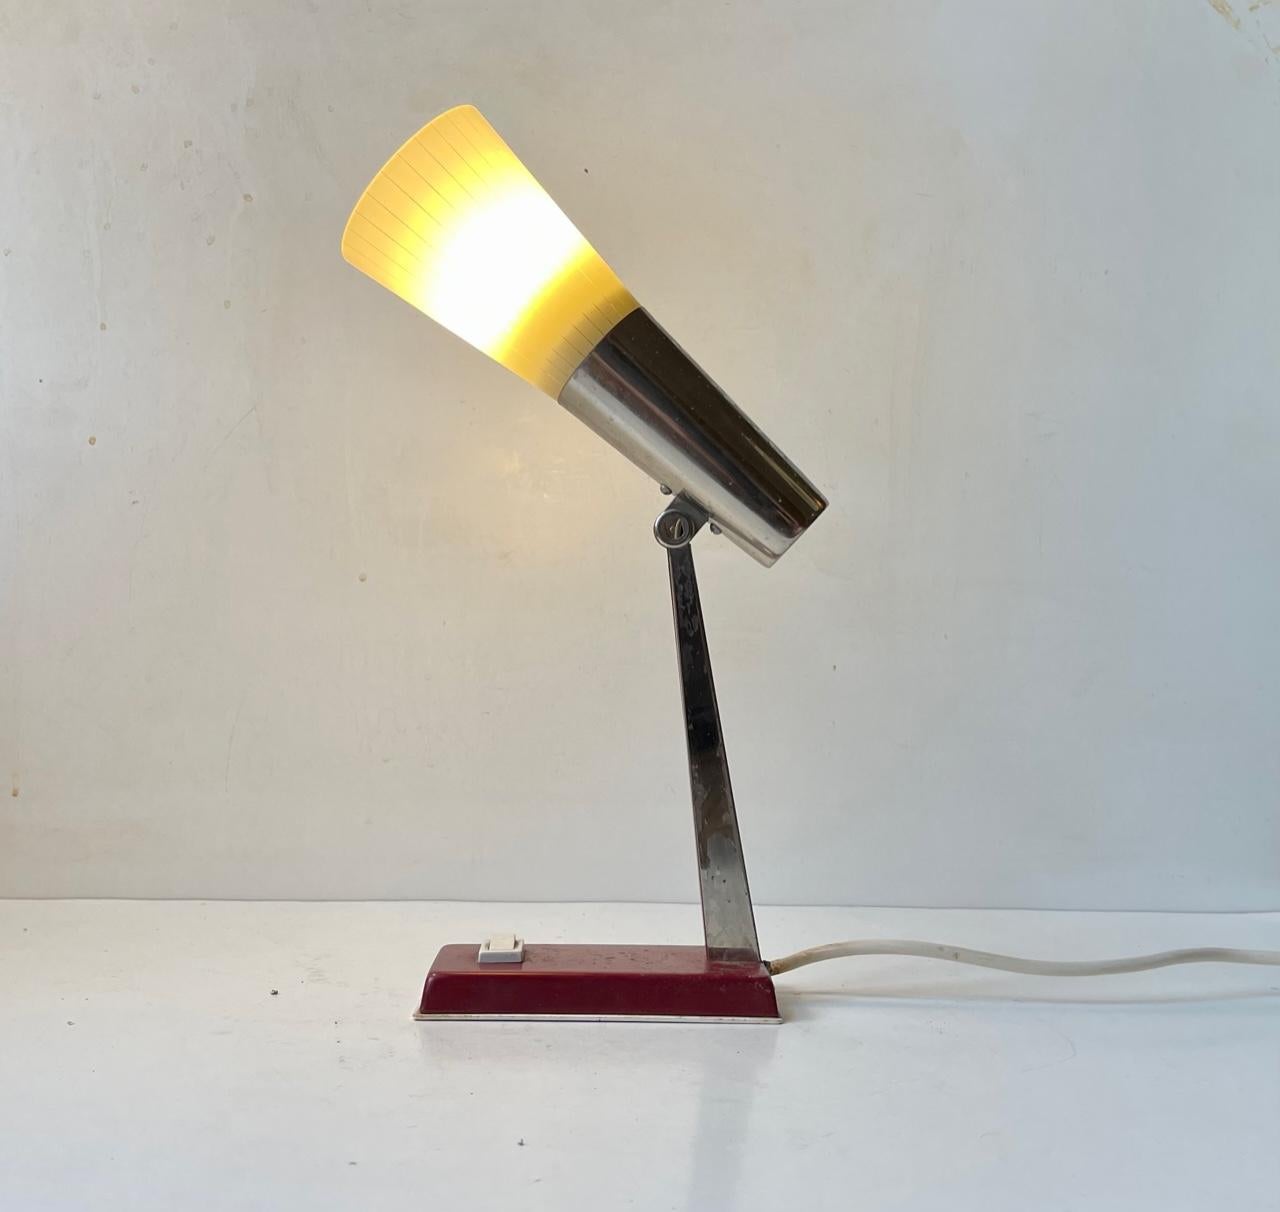 Small adjustable bedside table light with pin-striped hand-blown glass shade, maroon base and chrome plated stem. Designed and manufactured in Denmark in the 1950s by Voss. Measurements: H: 24 cm, Dept: 20 cm, Diameter: 8 cm (shade). For the US. It